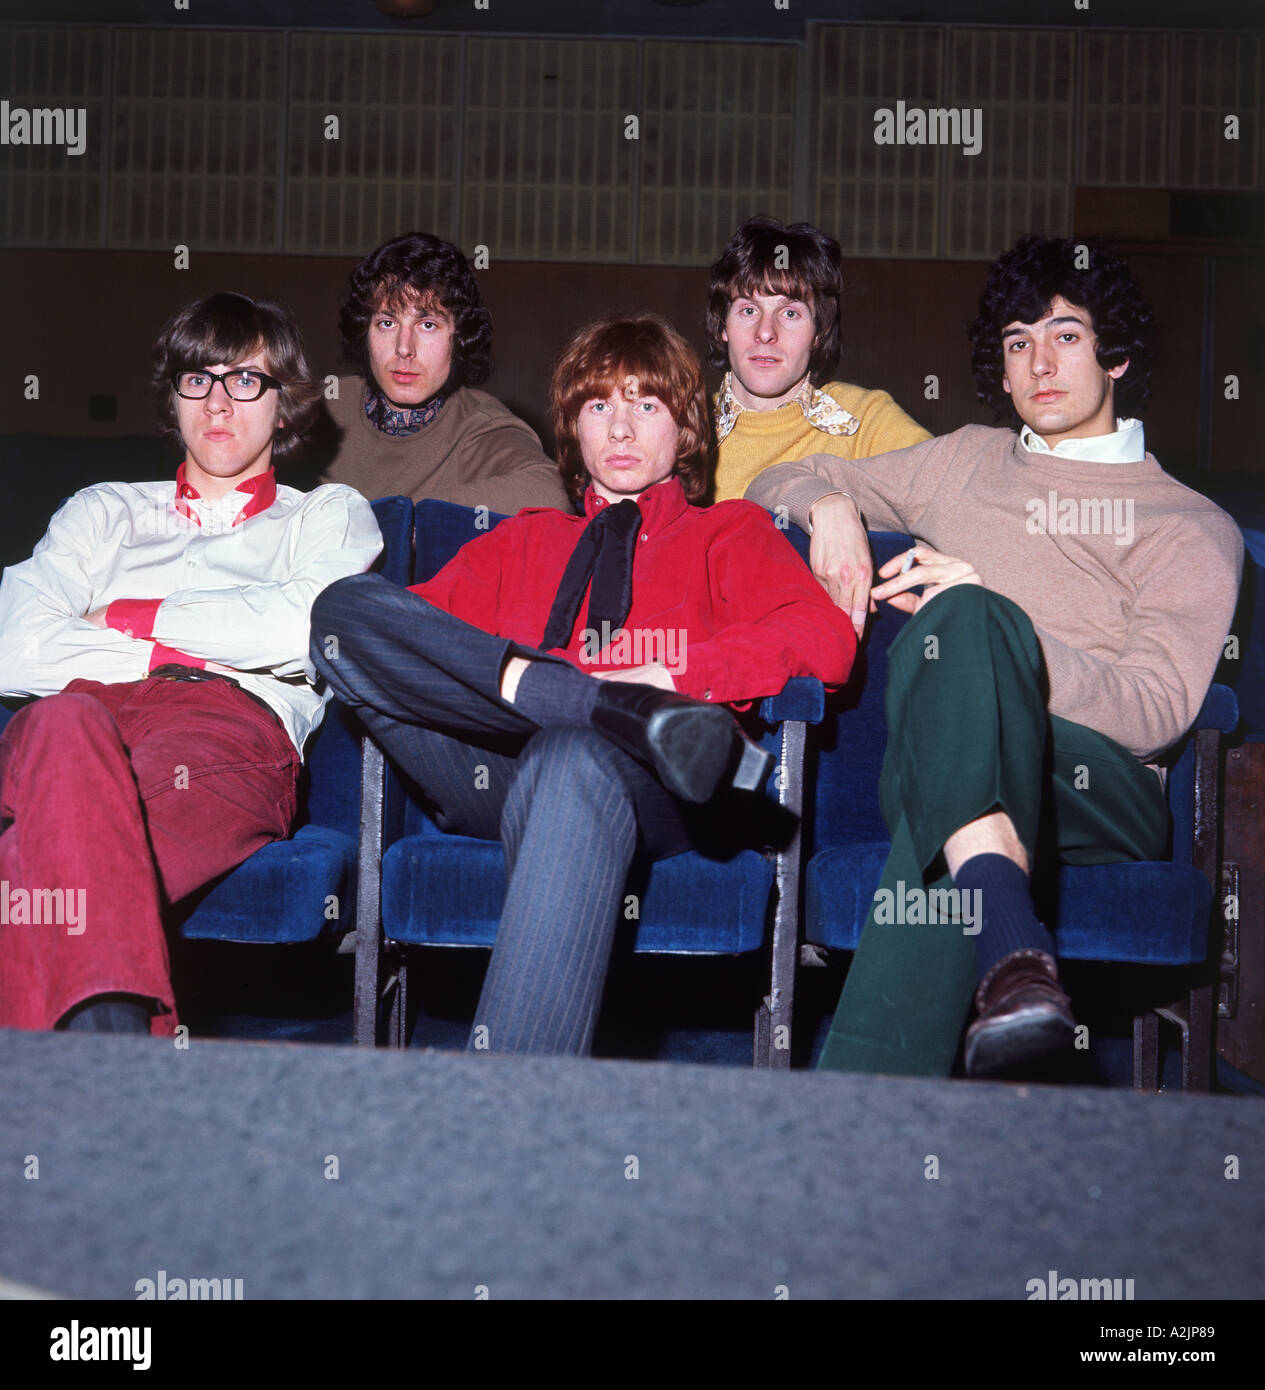 THE END British 60s pop group Stock Photo - Alamy